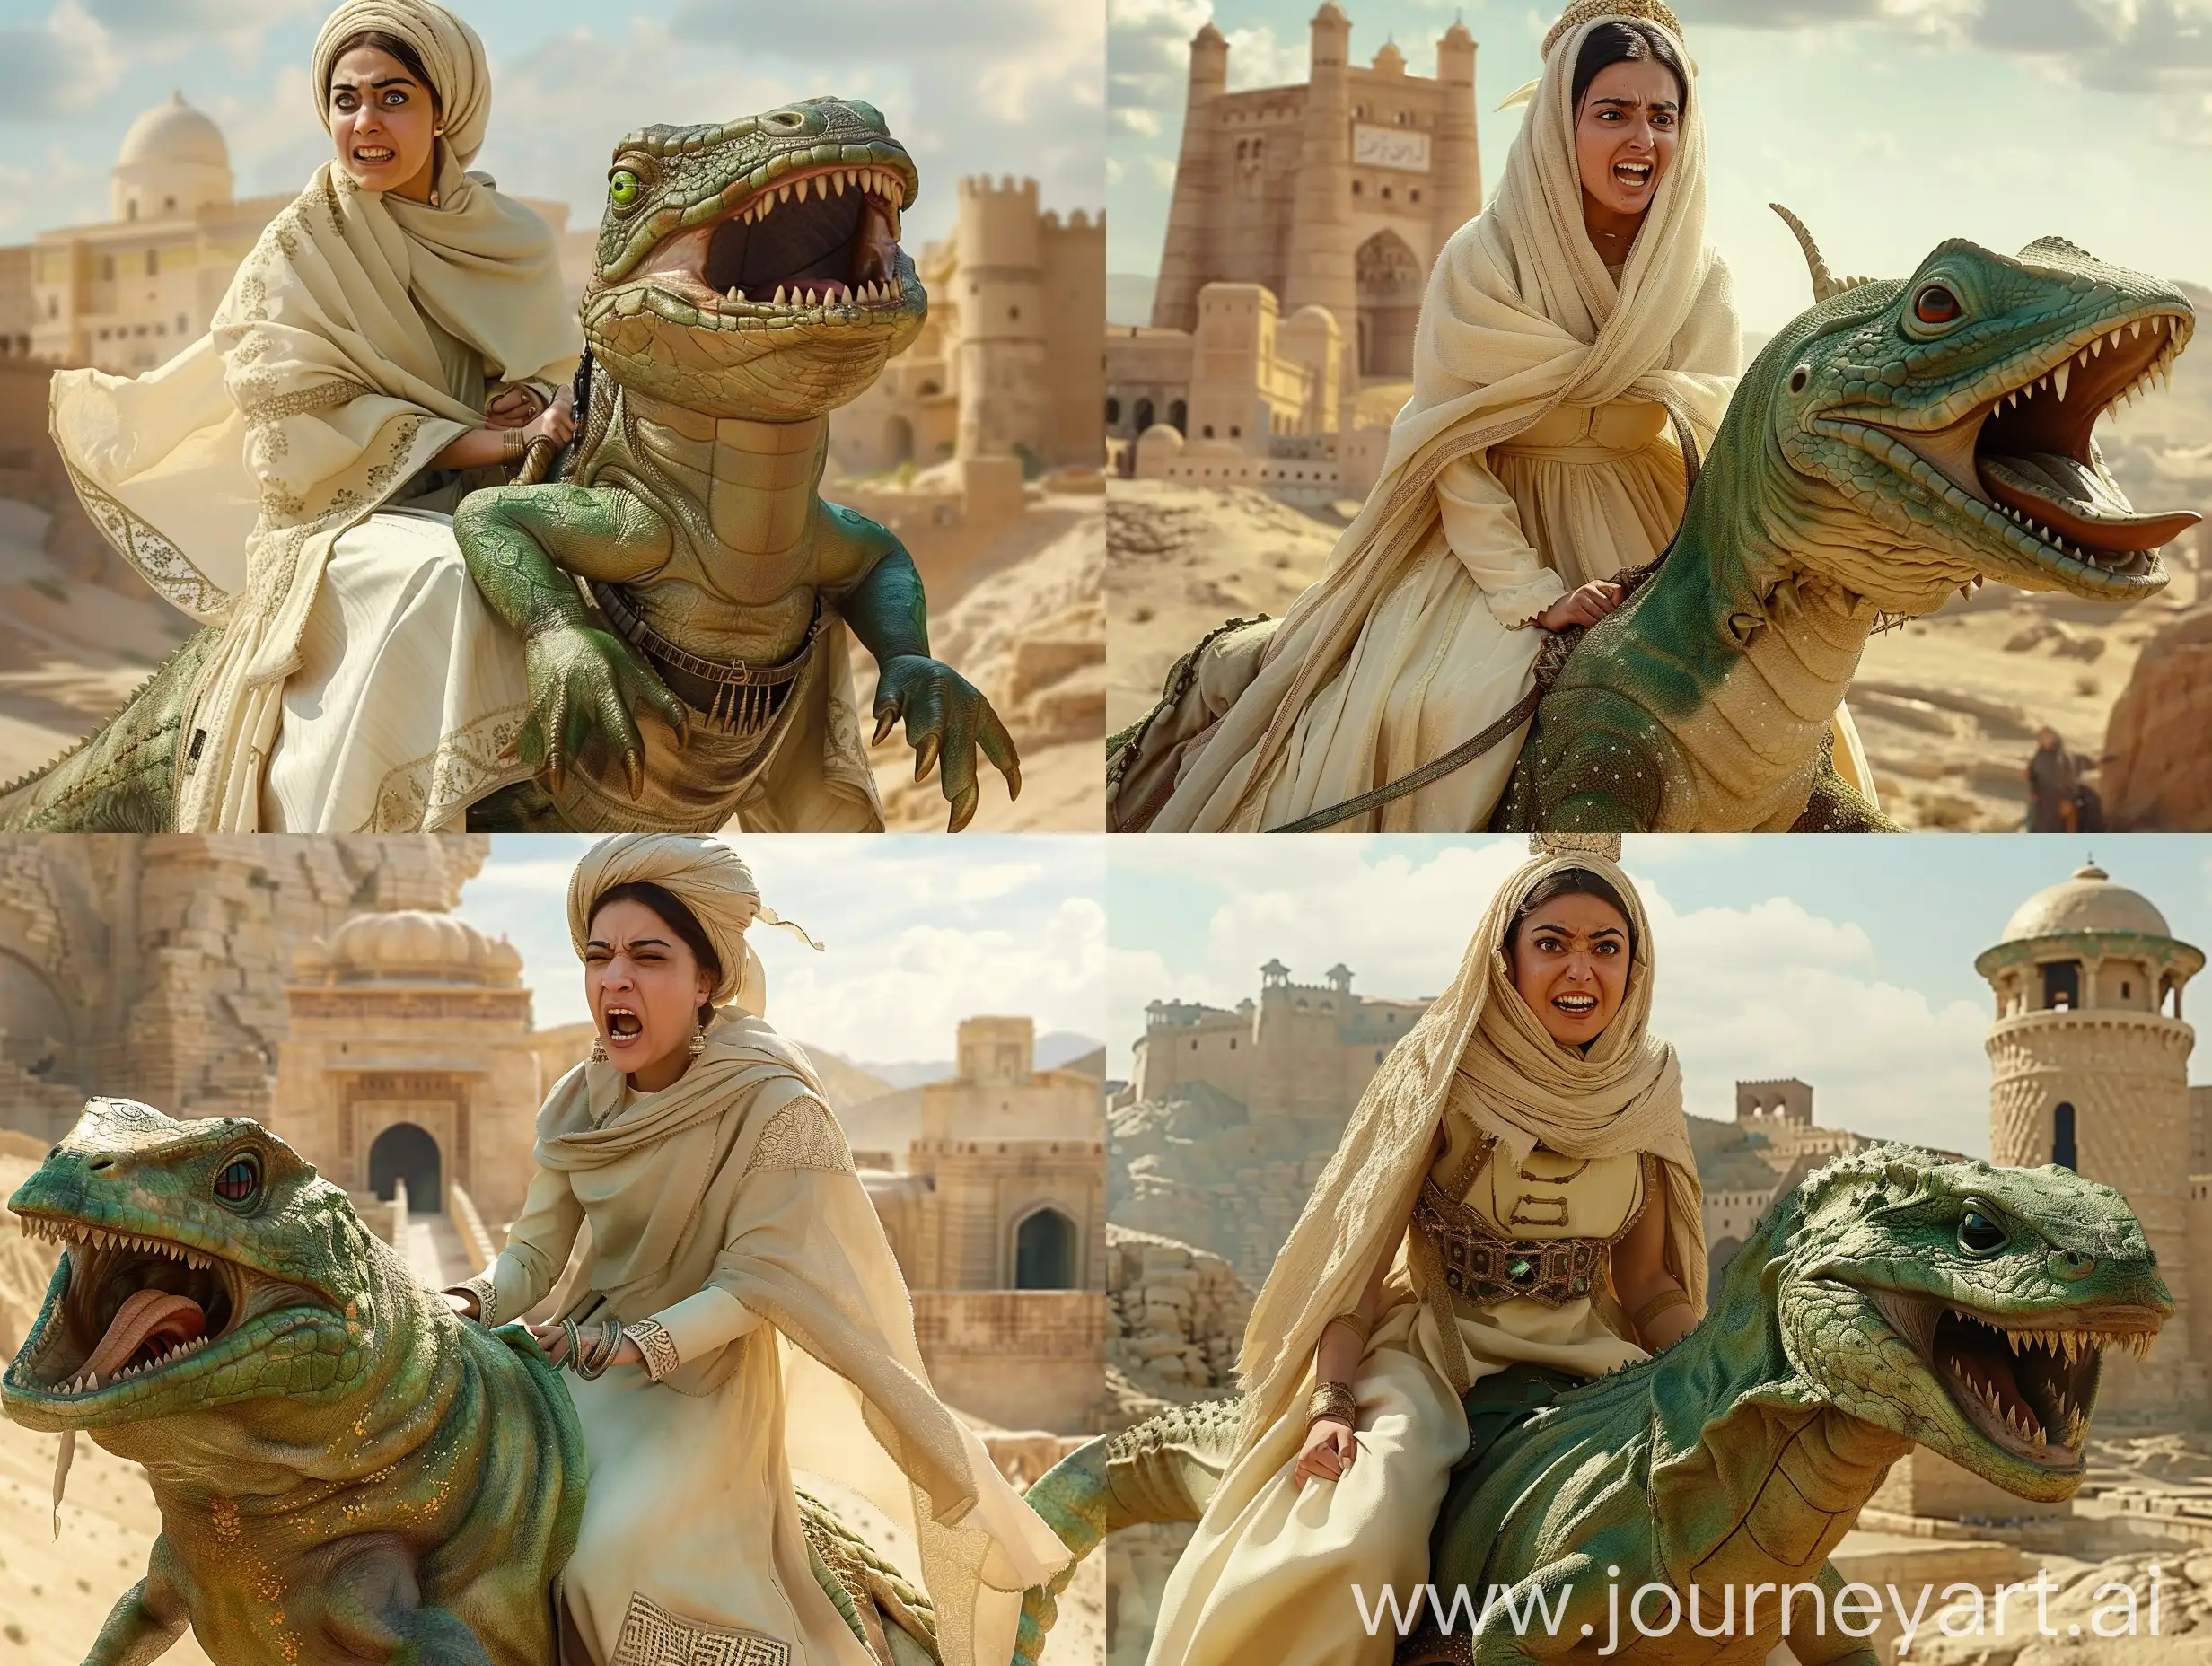 Young-Persian-Woman-Riding-Majestic-Lizard-Creature-in-Ancient-Citadel